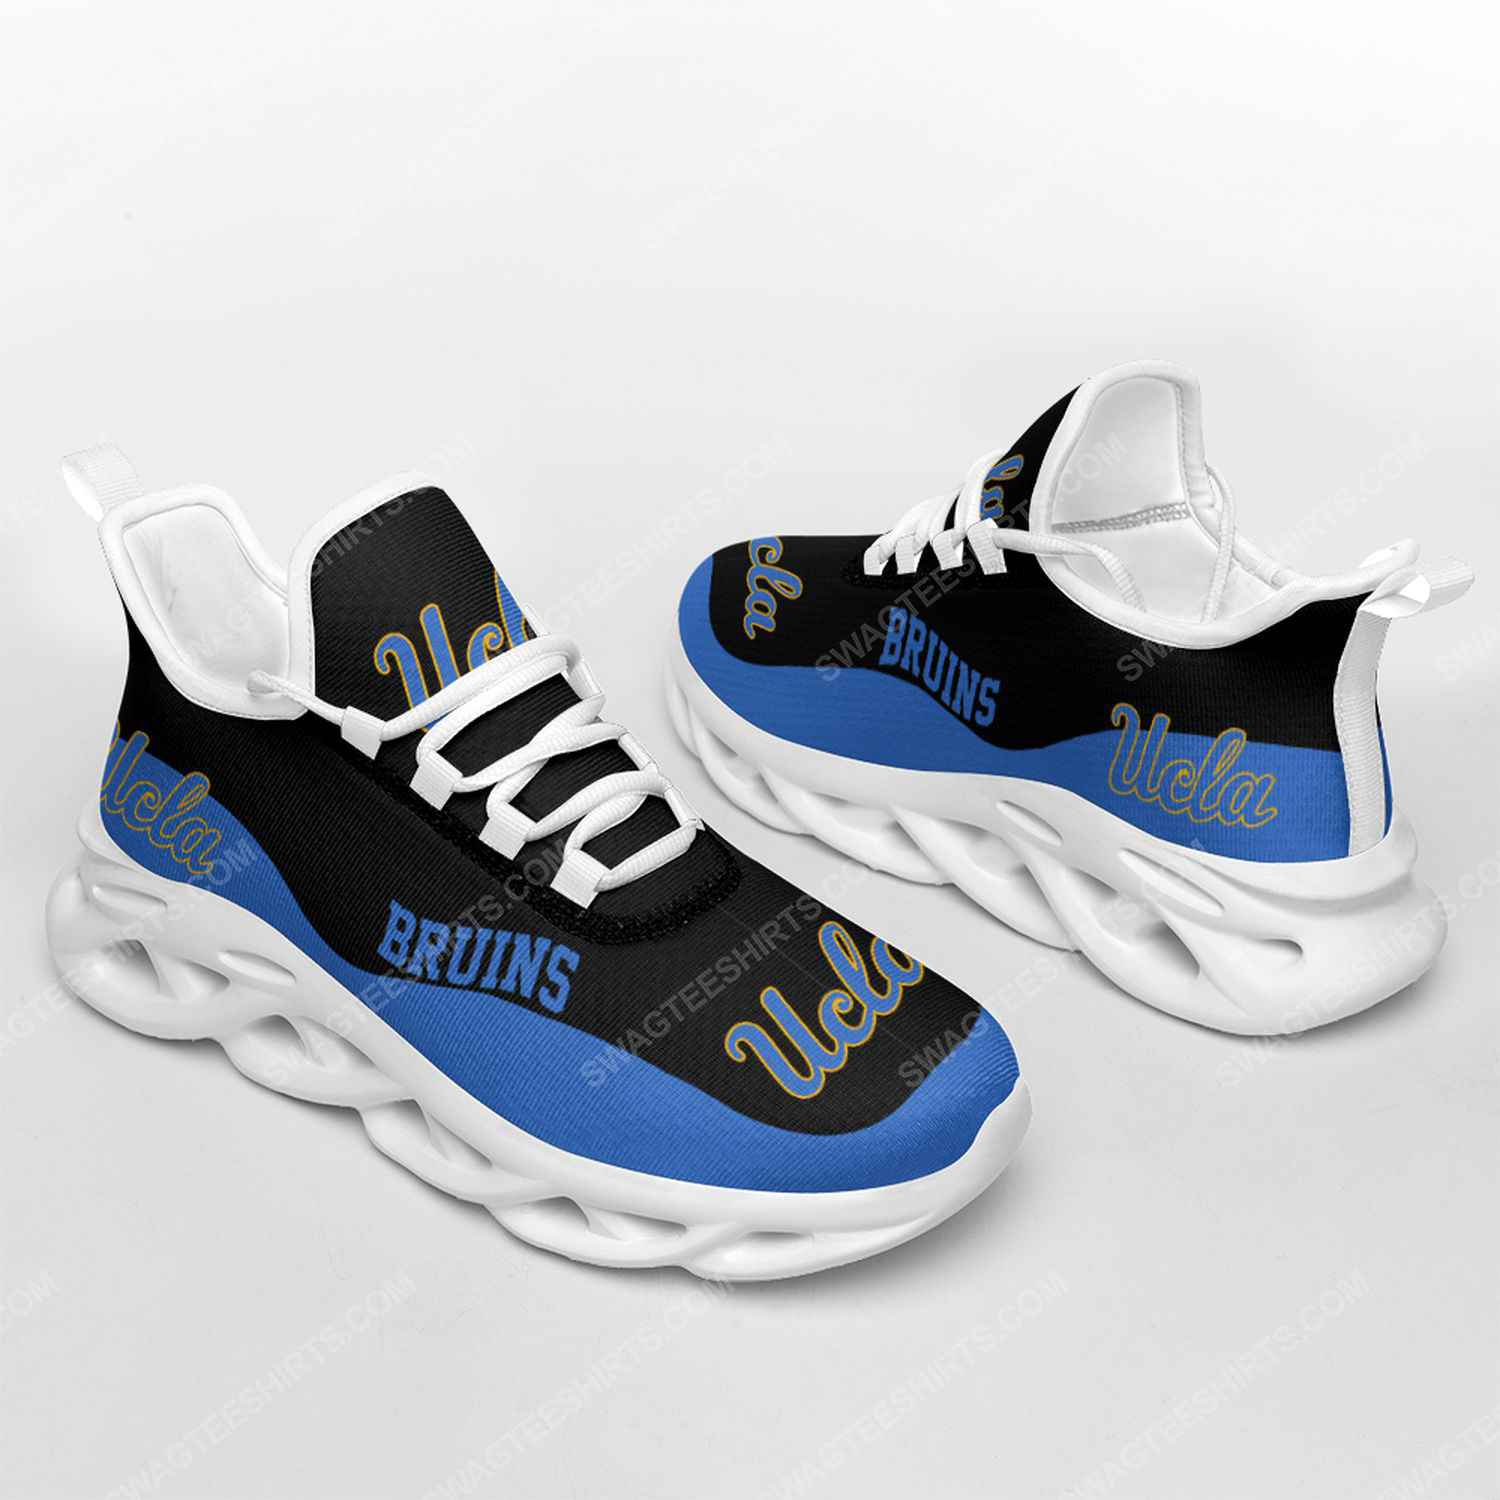 [special edition] The ucla bruins football team max soul shoes – Maria